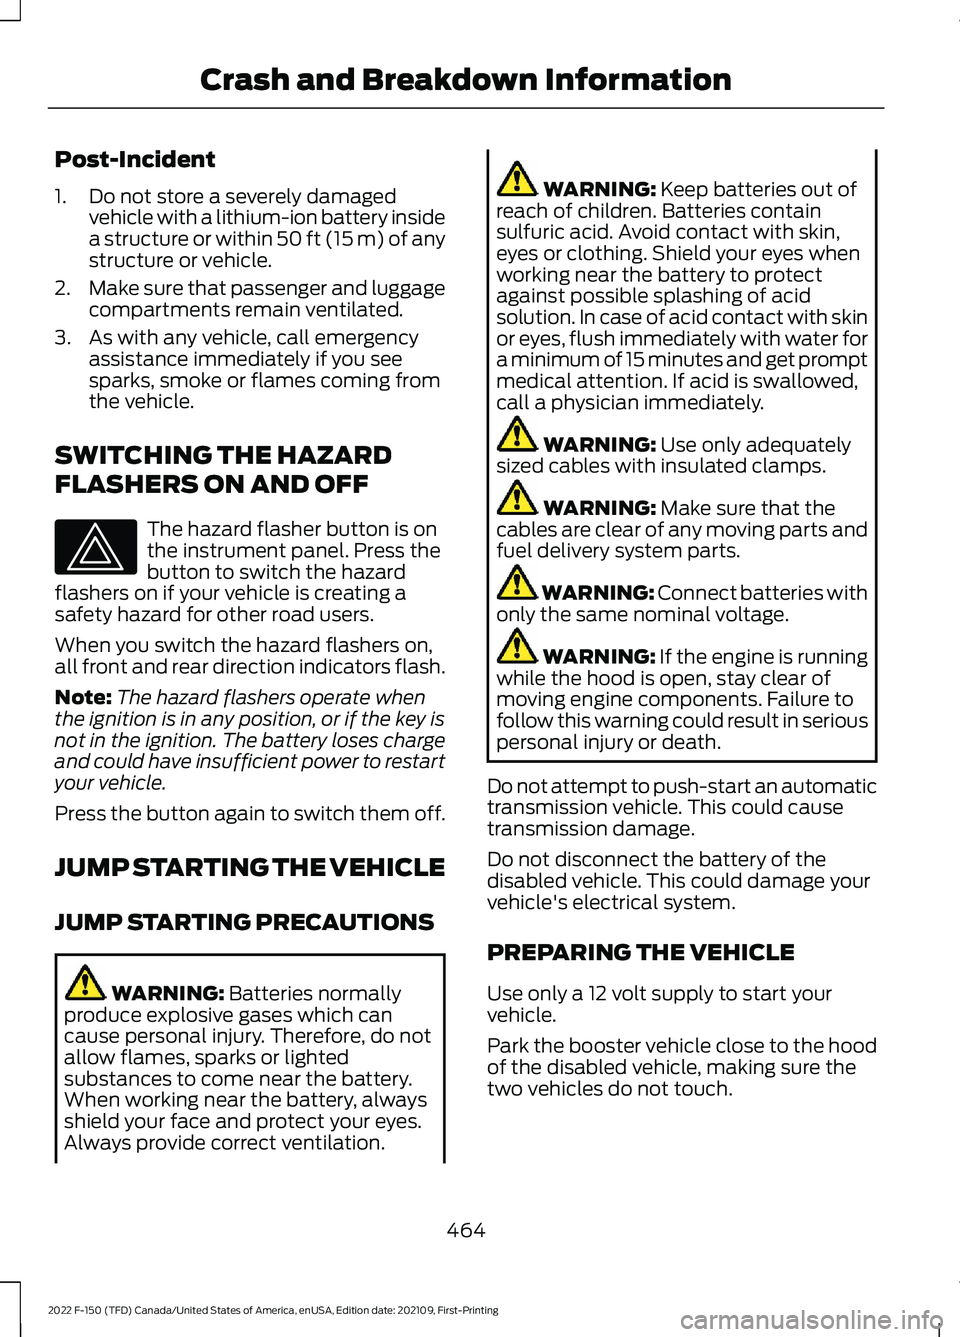 FORD F-150 2022  Owners Manual Post-Incident
1. Do not store a severely damaged
vehicle with a lithium-ion battery inside
a structure or within 50 ft (15 m) of any
structure or vehicle.
2. Make sure that passenger and luggage
compa